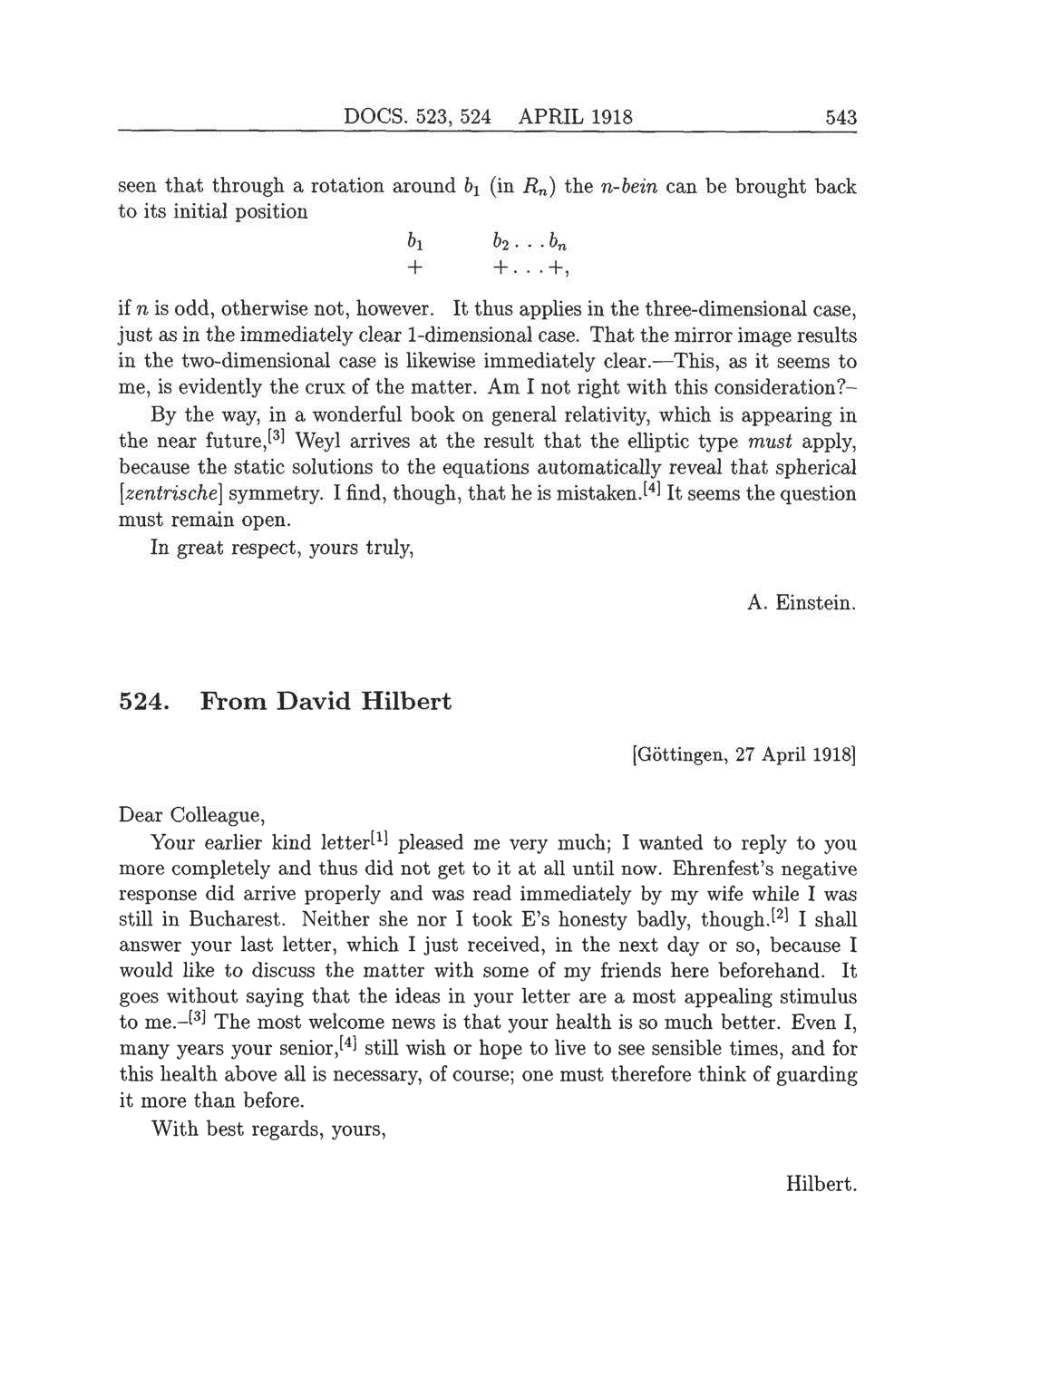 Volume 8: The Berlin Years: Correspondence, 1914-1918 (English translation supplement) page 543